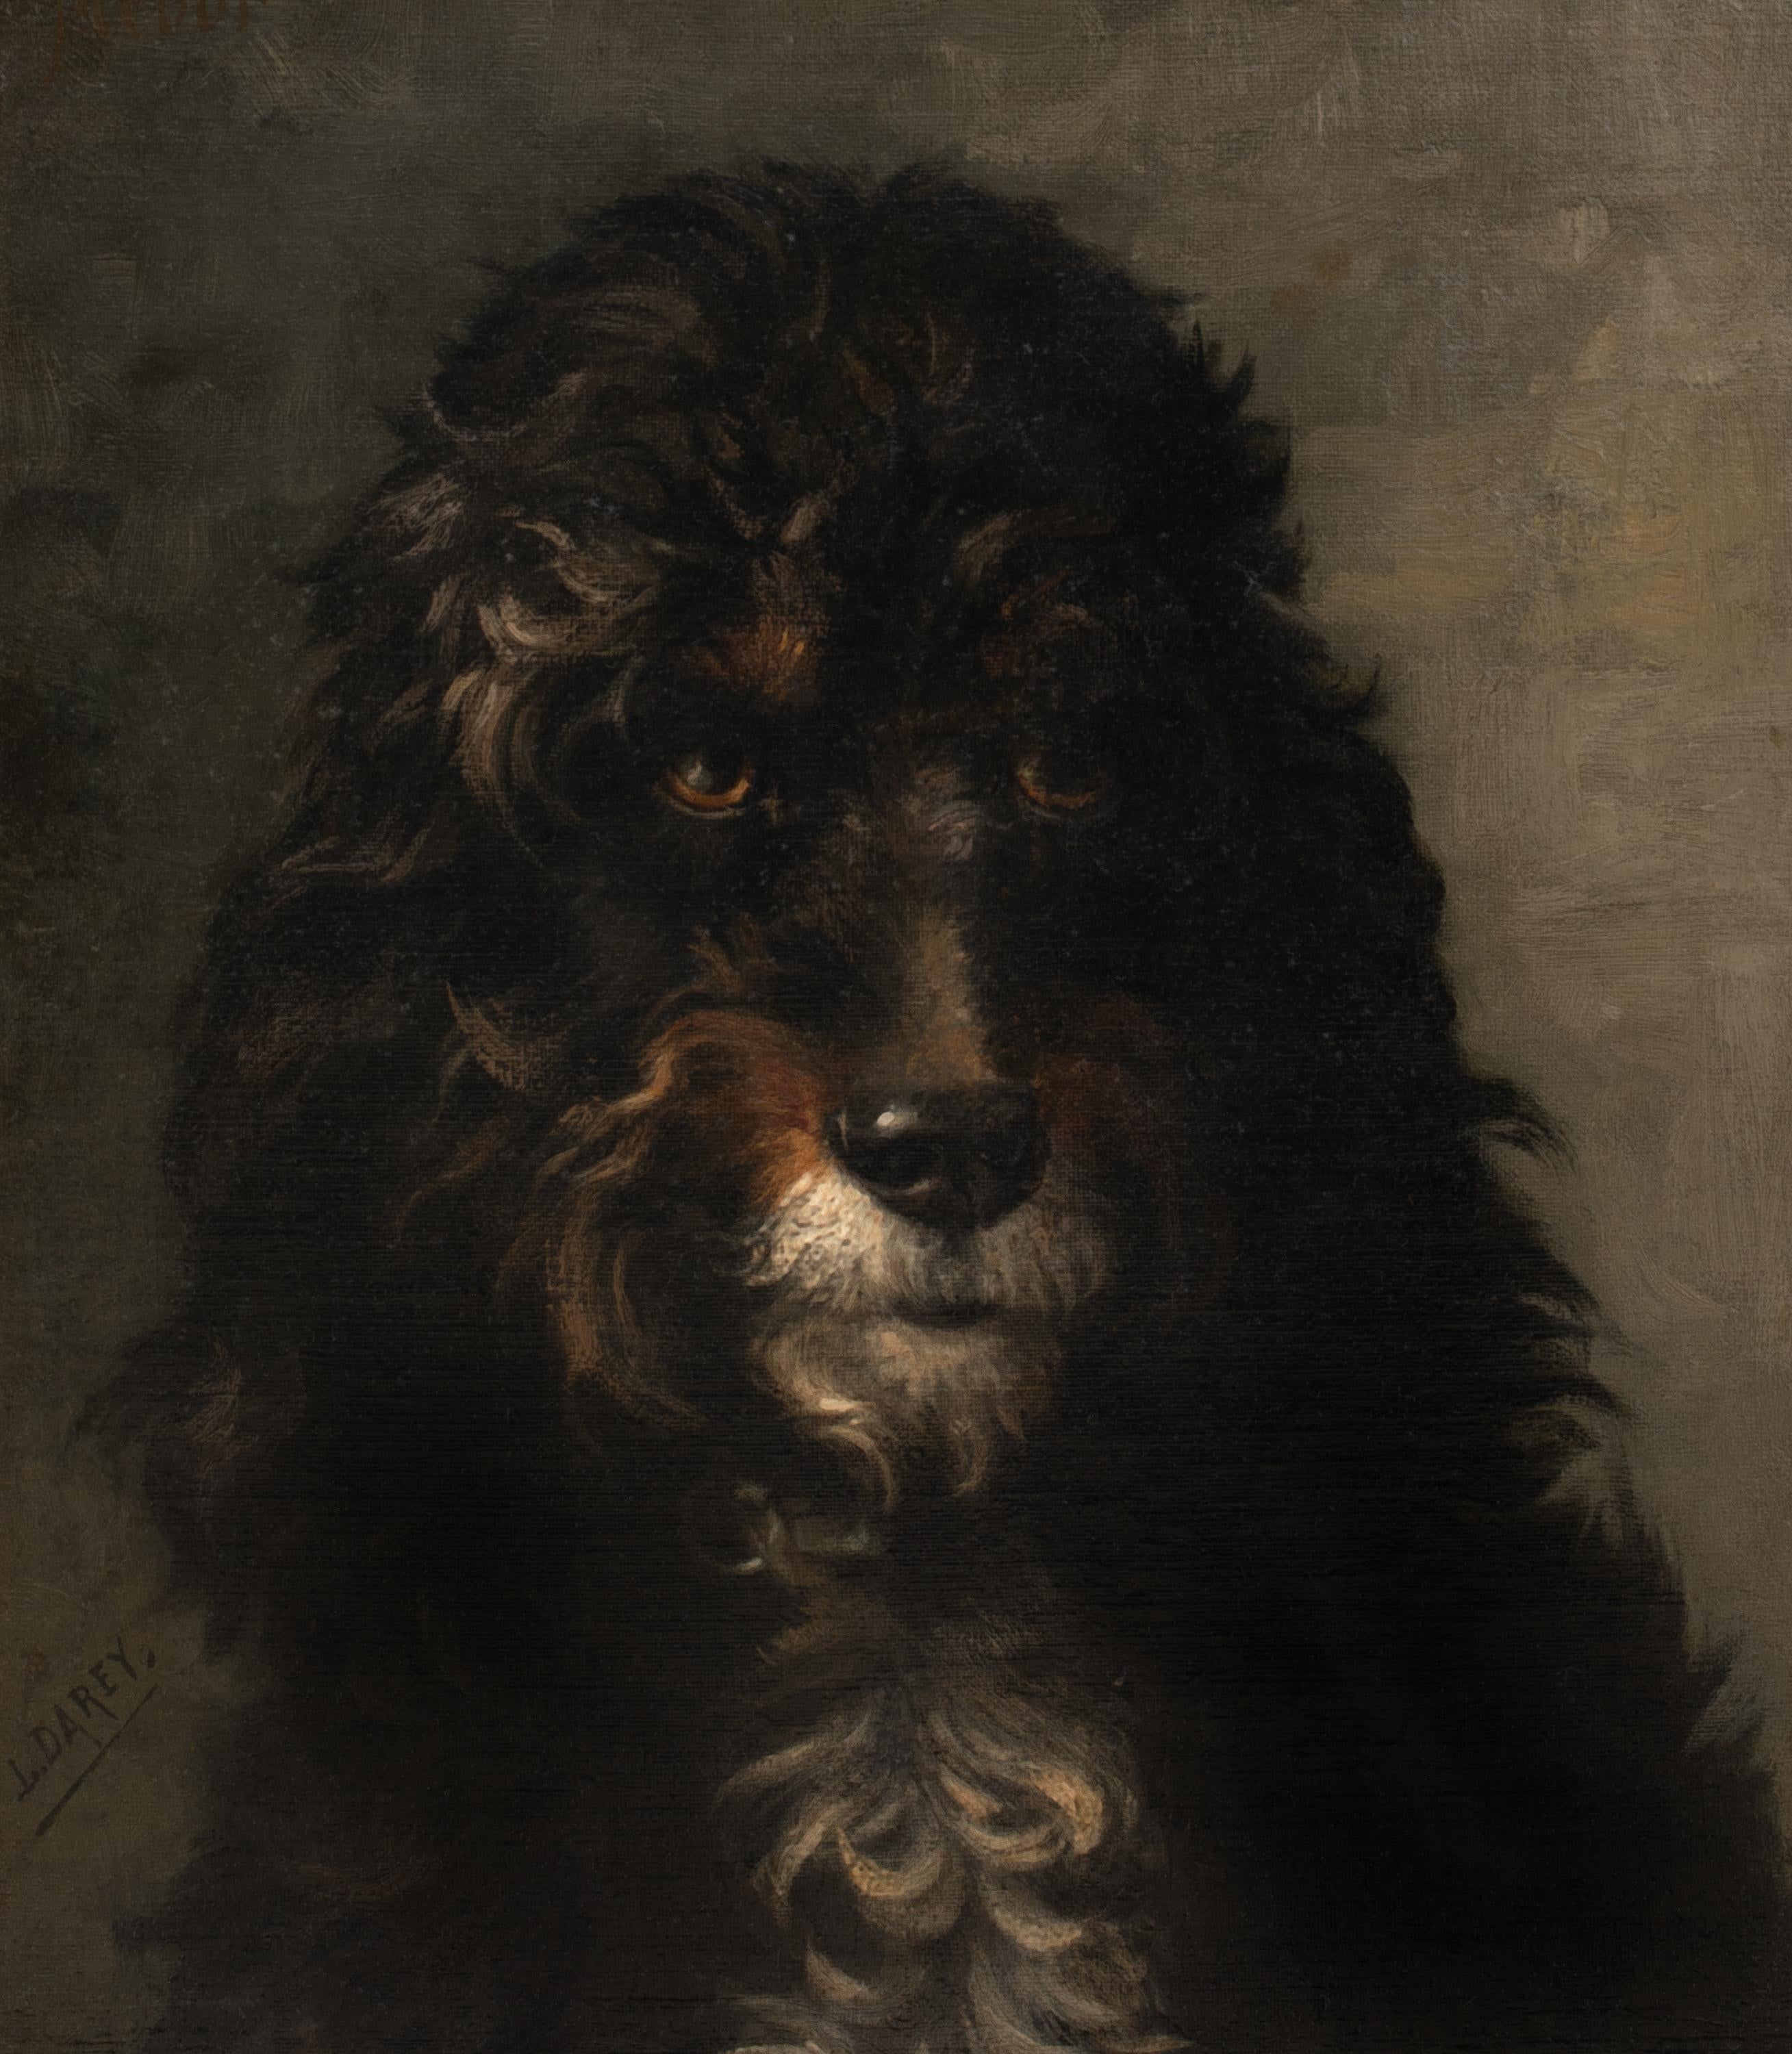 Portrait Of A French Poodle, 19th Century

by LOUIS DAREY (1863-1914)

Large 19th Century French portrait of the head of a poodle, oil on canvas by Louis Carey. Good quality and condition example of the famous dog painters work depicting an early